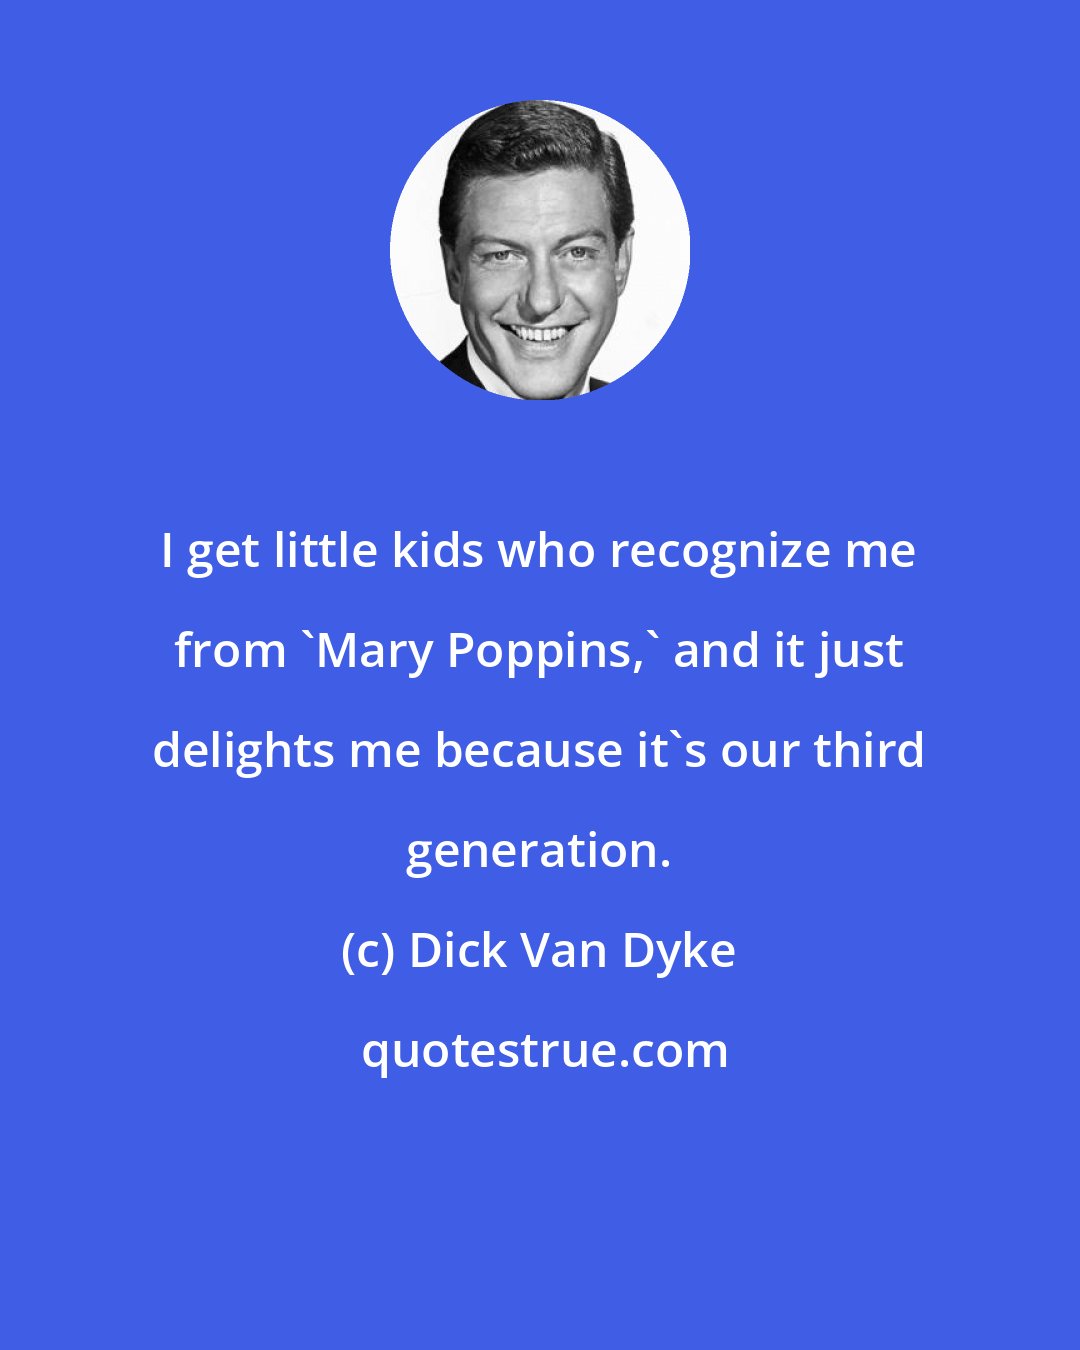 Dick Van Dyke: I get little kids who recognize me from 'Mary Poppins,' and it just delights me because it's our third generation.